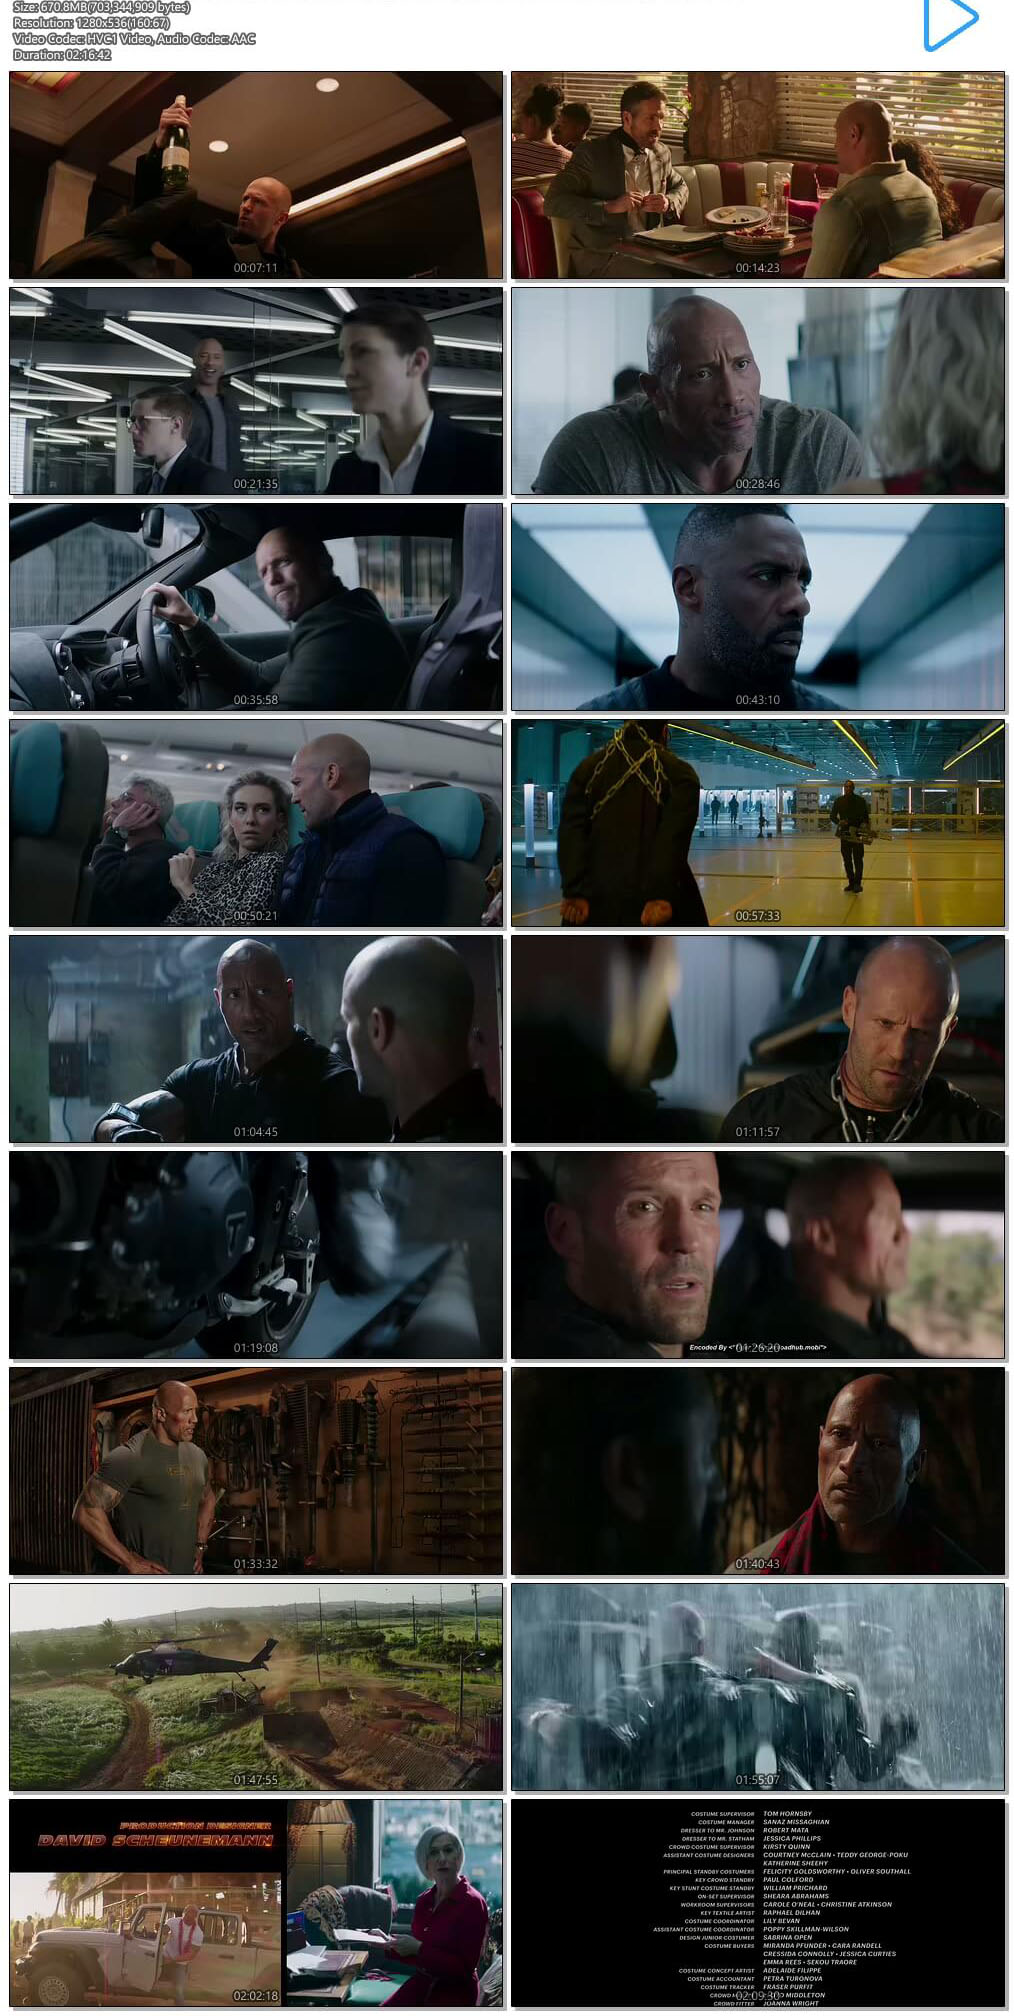 Fast and Furious Hobbs and Shaw (2019) 720p BRRip x265 HEVC Dual Audio Eng Hindi ORG-DLW